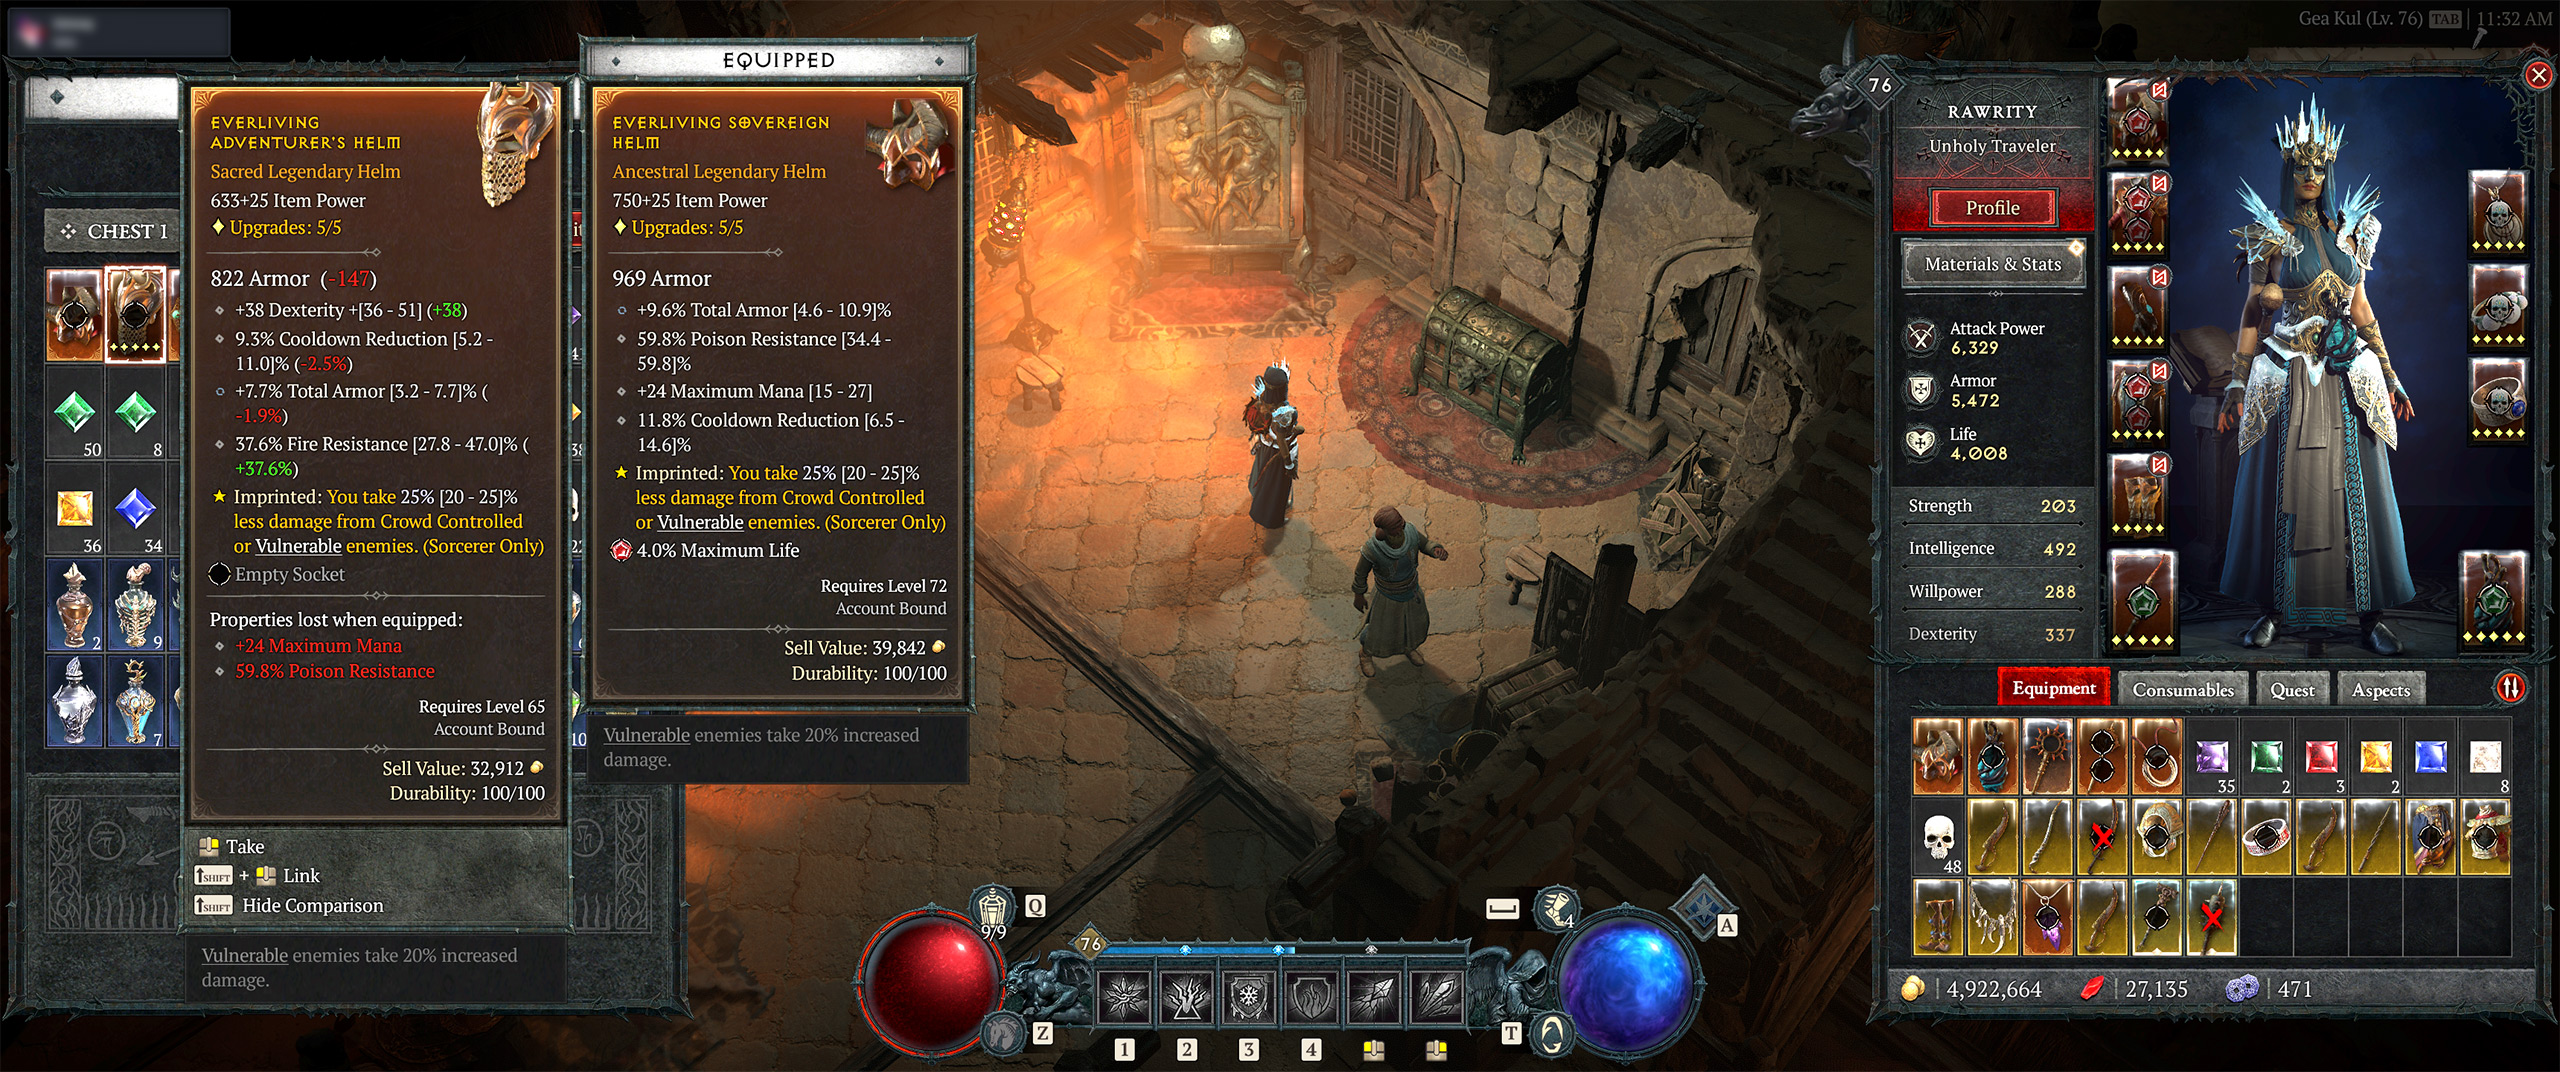 Diablo IV's items have no hierarchy, making it a complete headache to easily compare stats